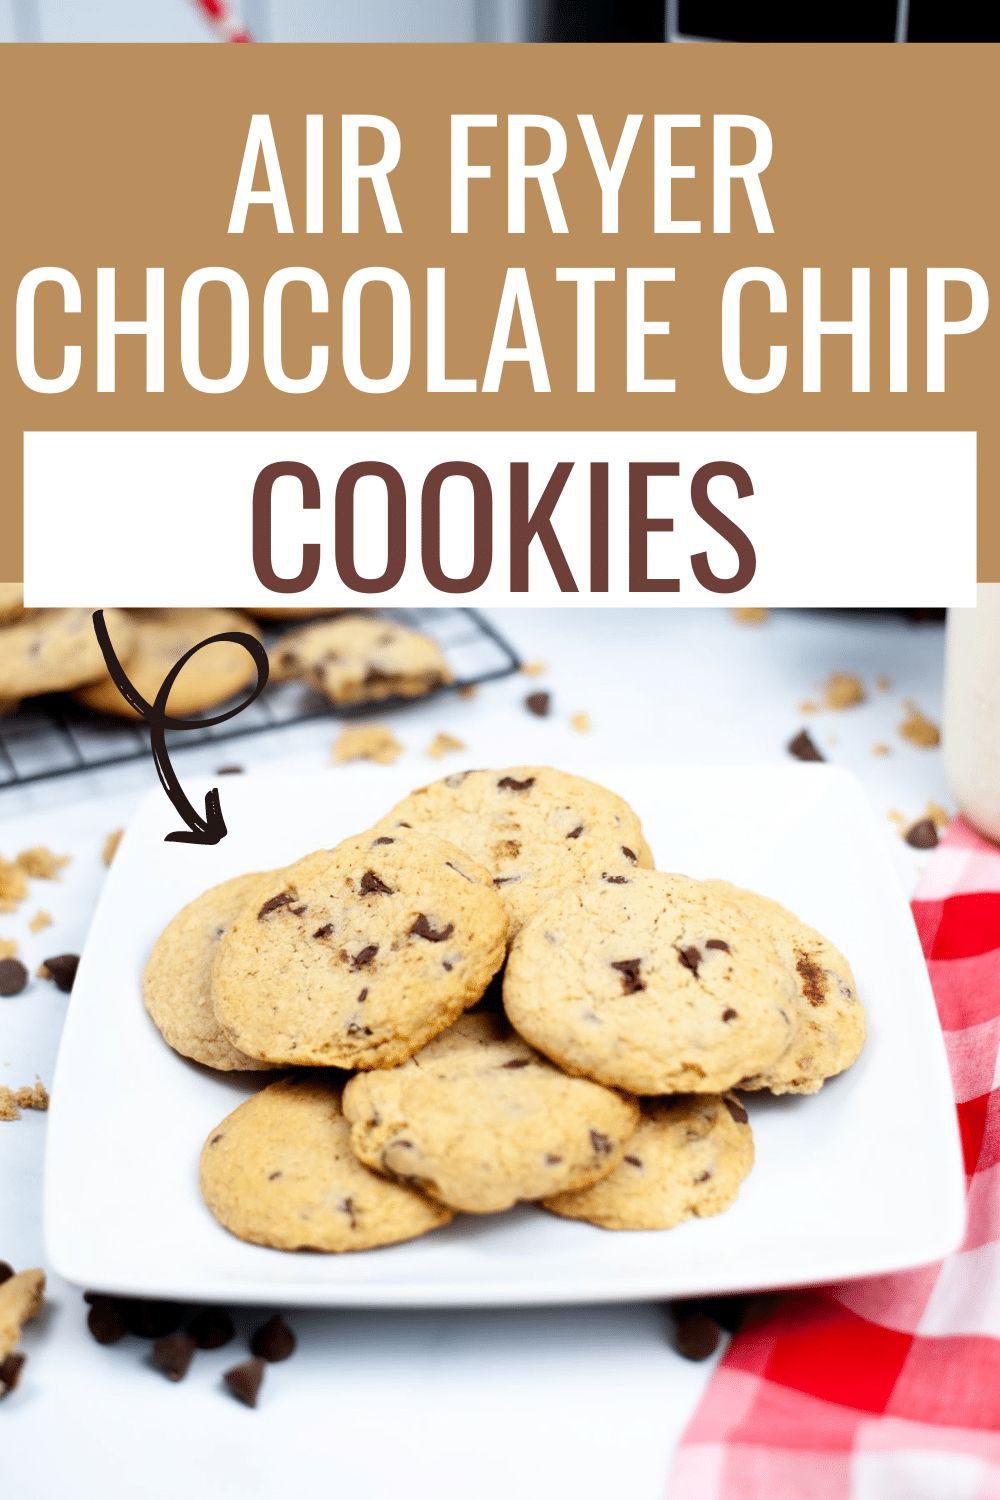 Air Fryer Chocolate Chip Cookies are the easiest way to make chocolate chip cookies! You'll have delicious, warm cookies in under 20 minutes. #airfryer #chocolatechipcookies #cookies #chocolatechip #recipe via @wondermomwannab